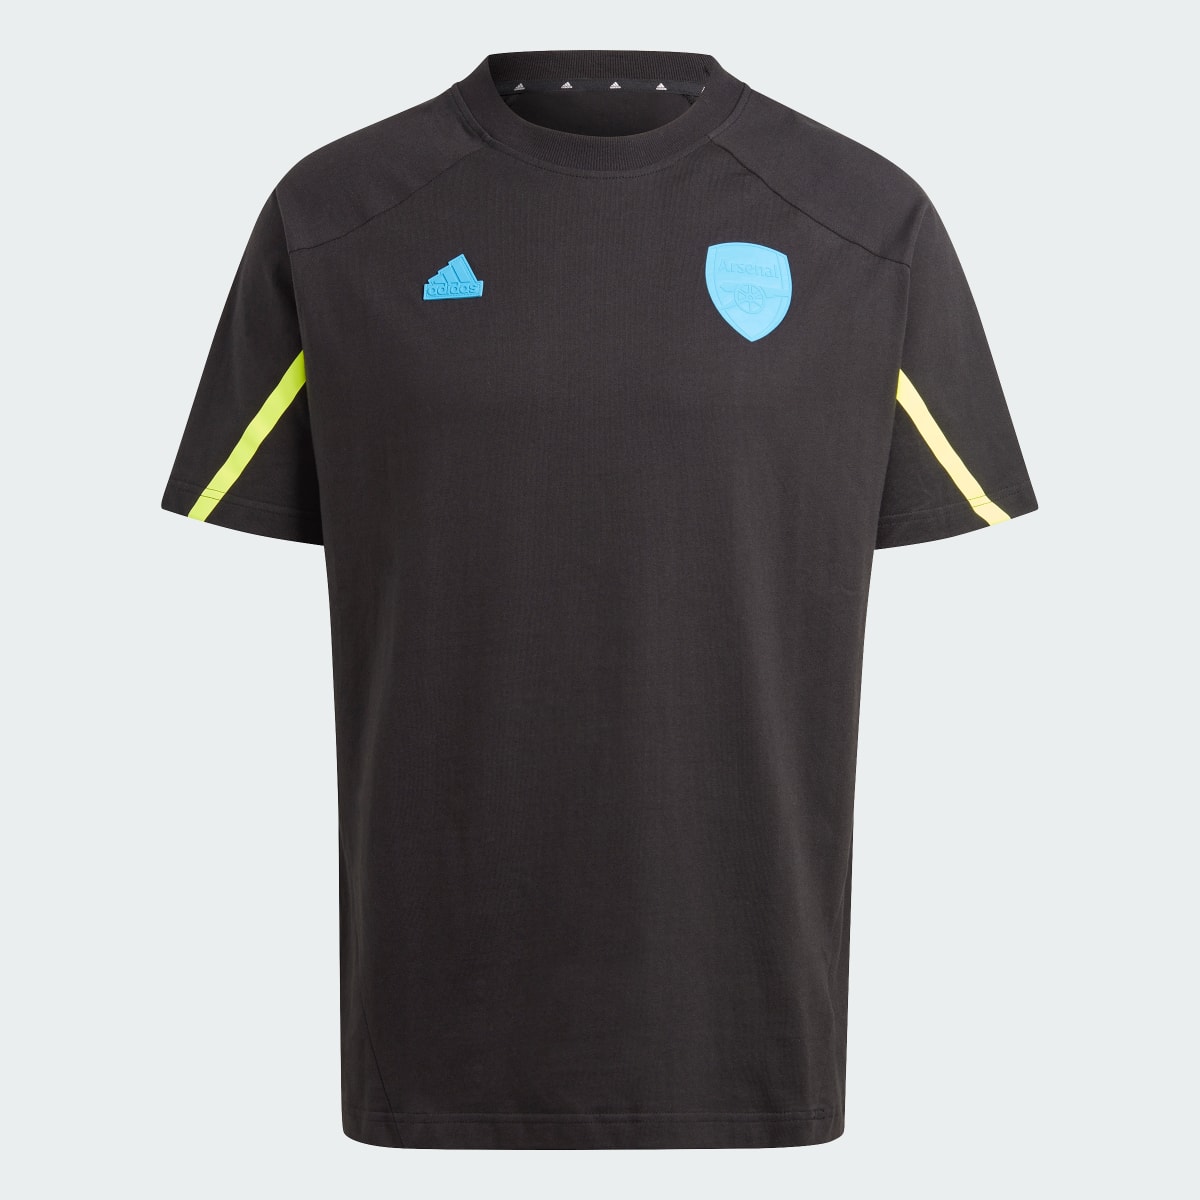 Adidas T-shirt Designed for Gameday Arsenal FC. 5